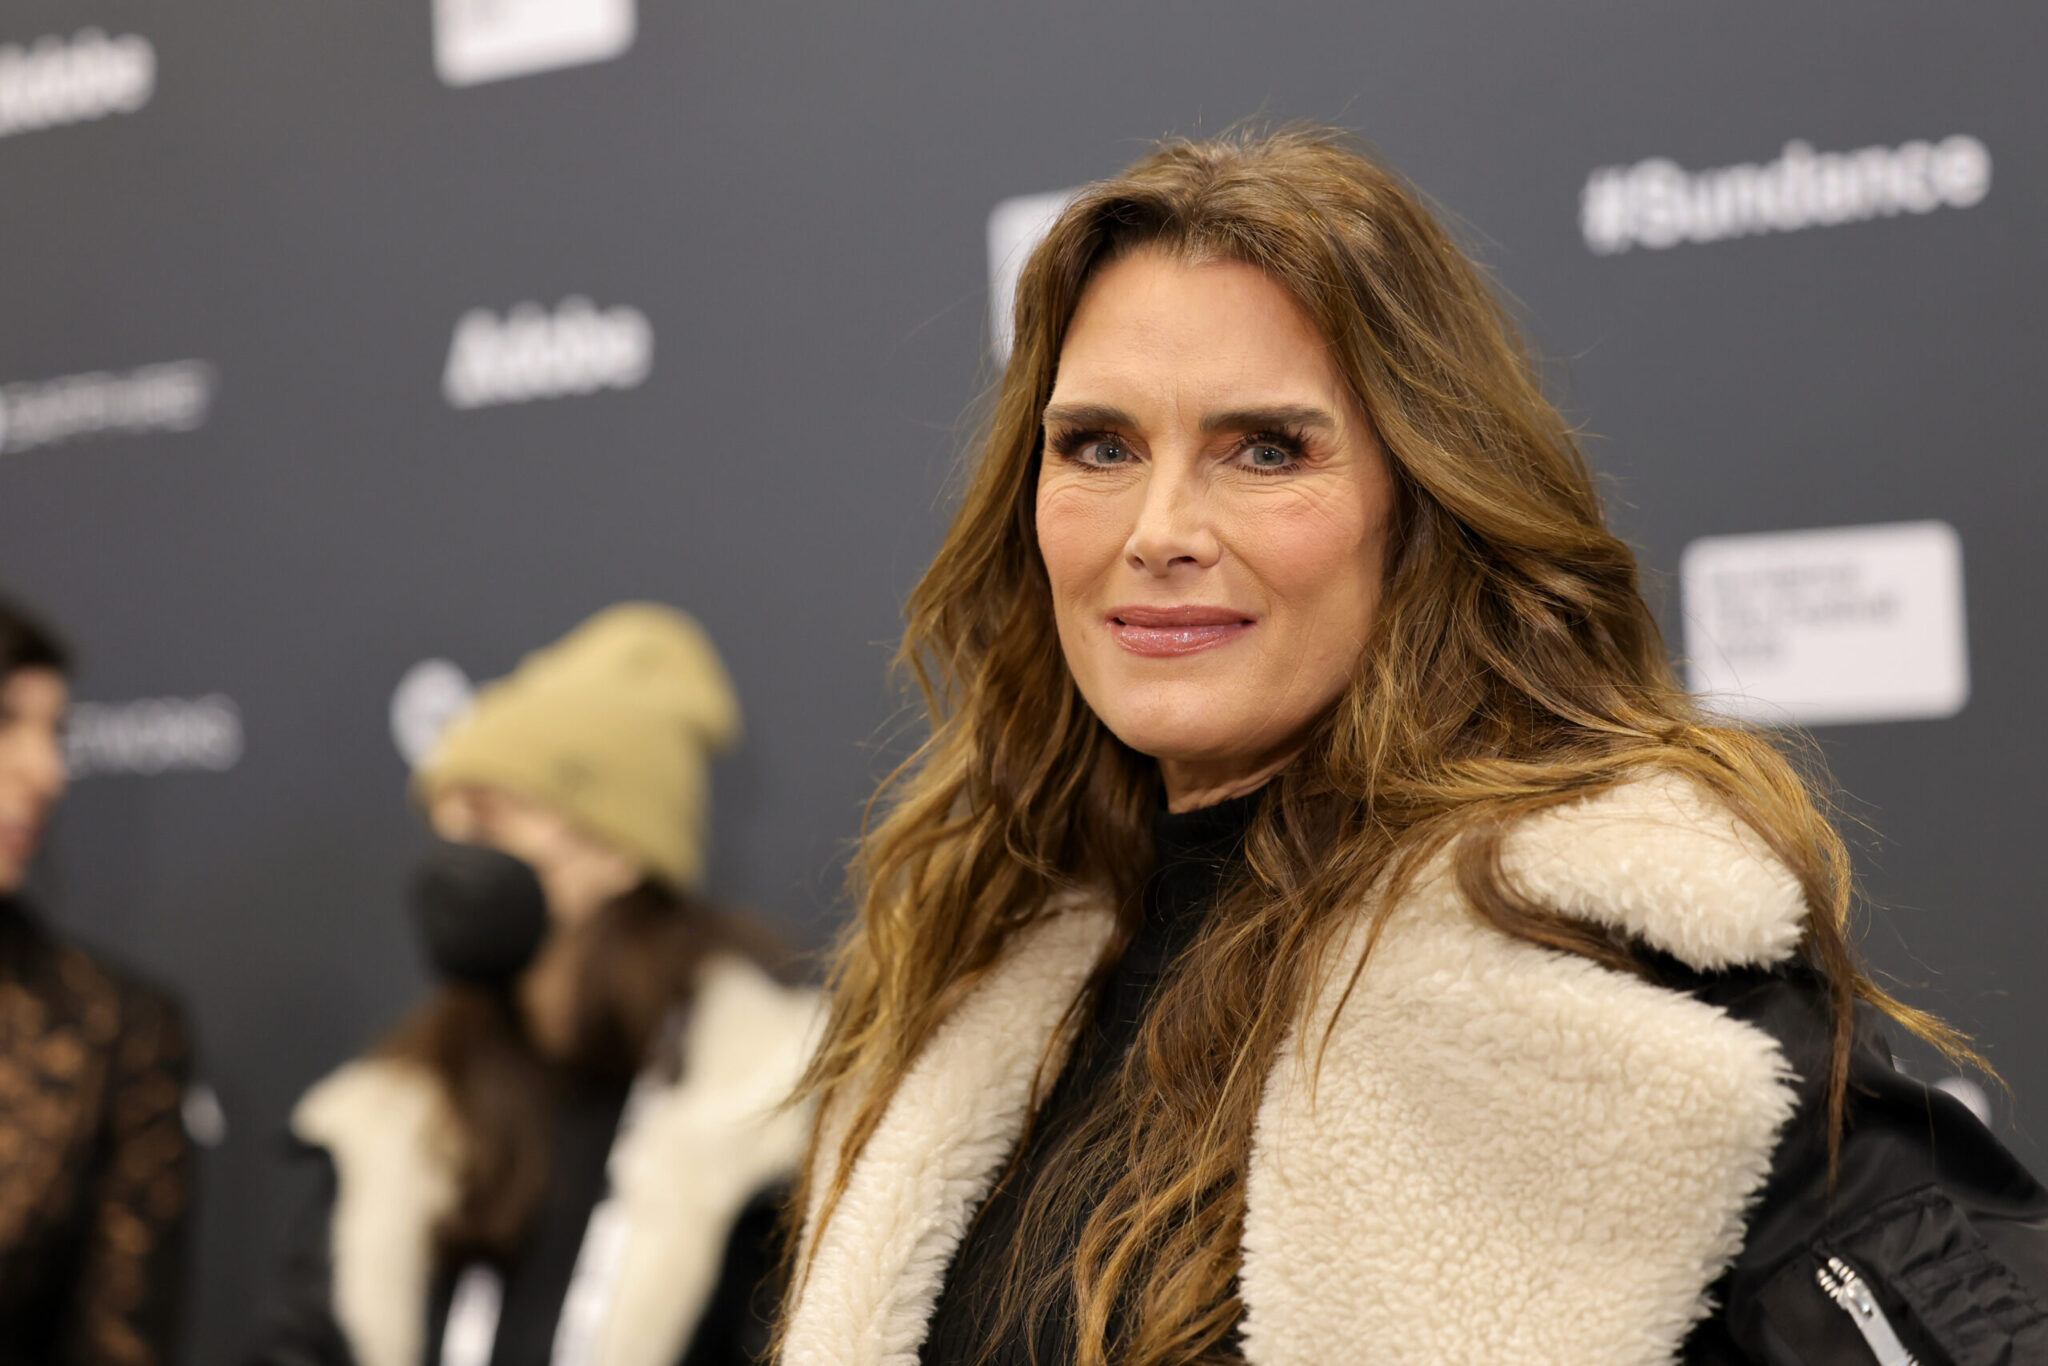 A woman (Brooke Shields) with long brown hair in a white and black coat smiles to the camera at the 2023 Sundance Film Festival.